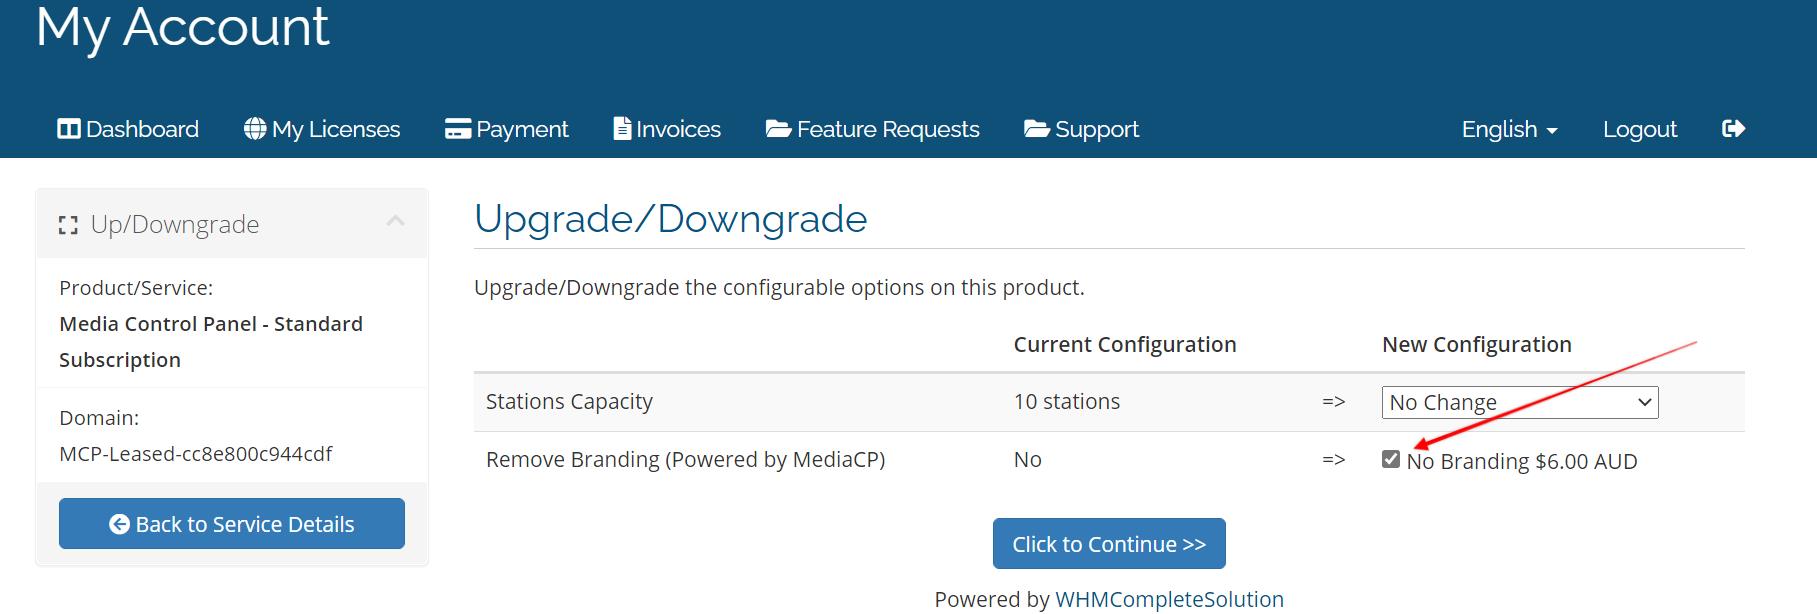 Upgrade_Downgrade - Media Control Panel and 1 more page - Work - Microsoft_.. 2021-08-02 at 2.30.54 PM